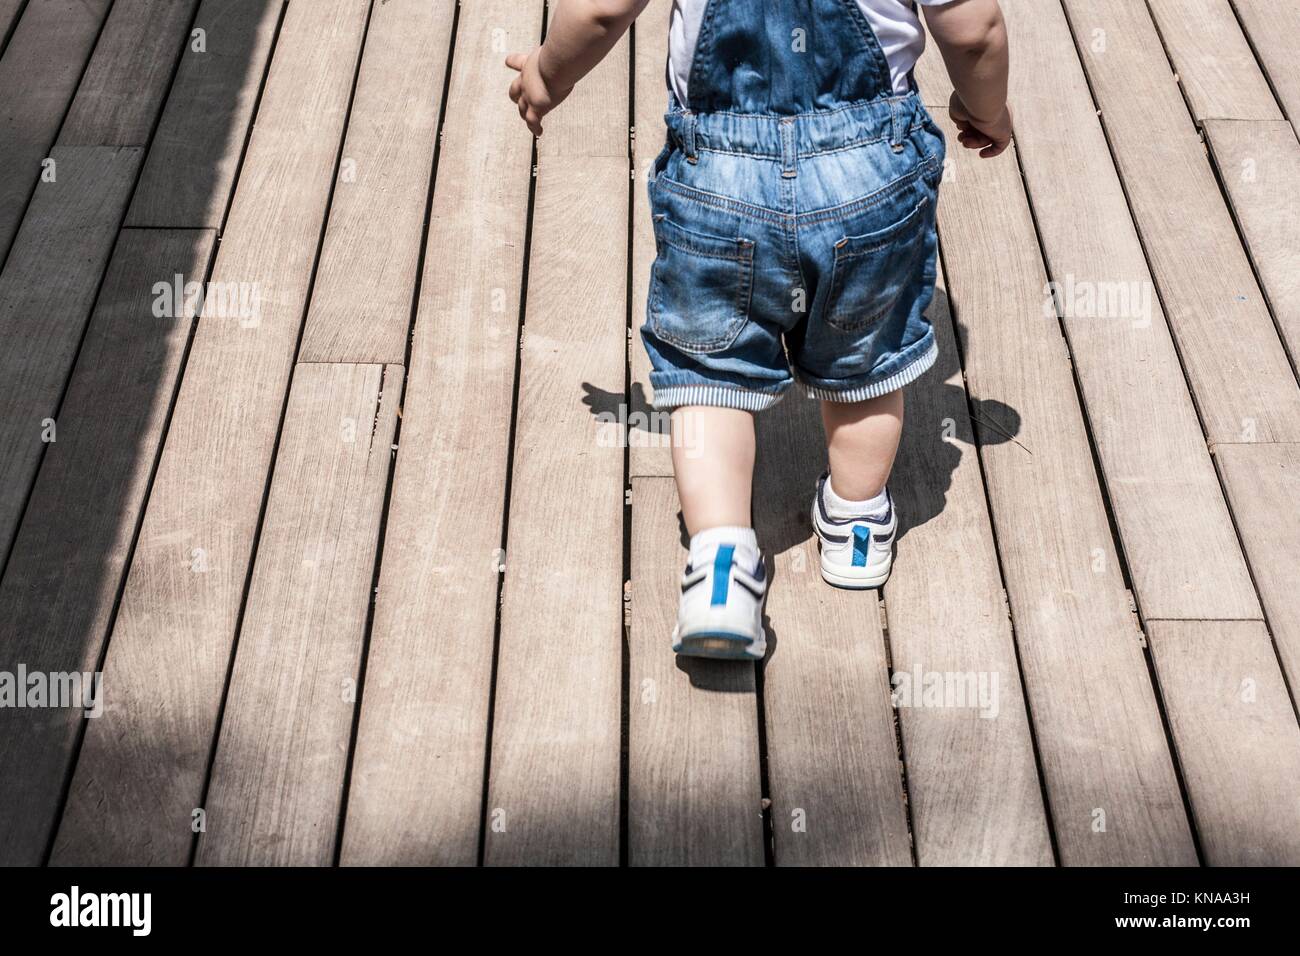 Baby boy learning to walk by himself. He is learning to overcome obstacles and new floor surface. Stock Photo